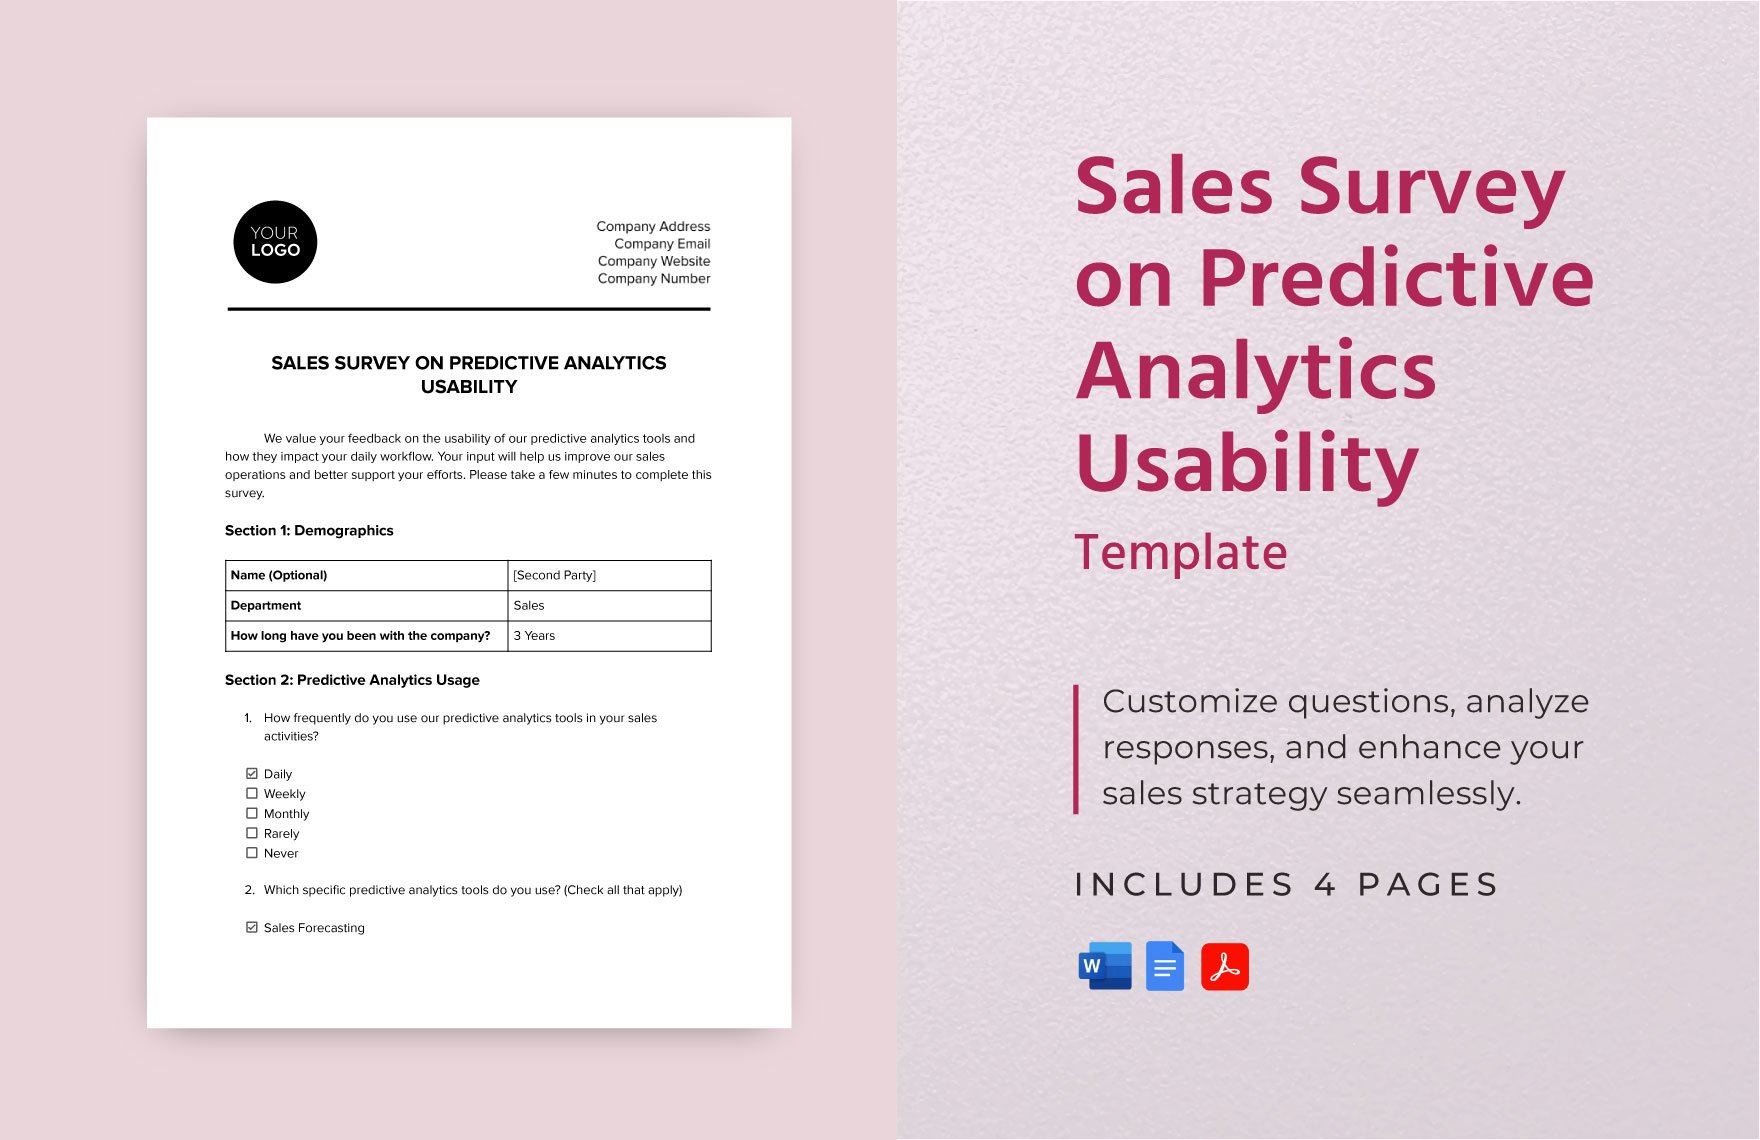 Sales Survey on Predictive Analytics Usability Template in Word, Google Docs, PDF